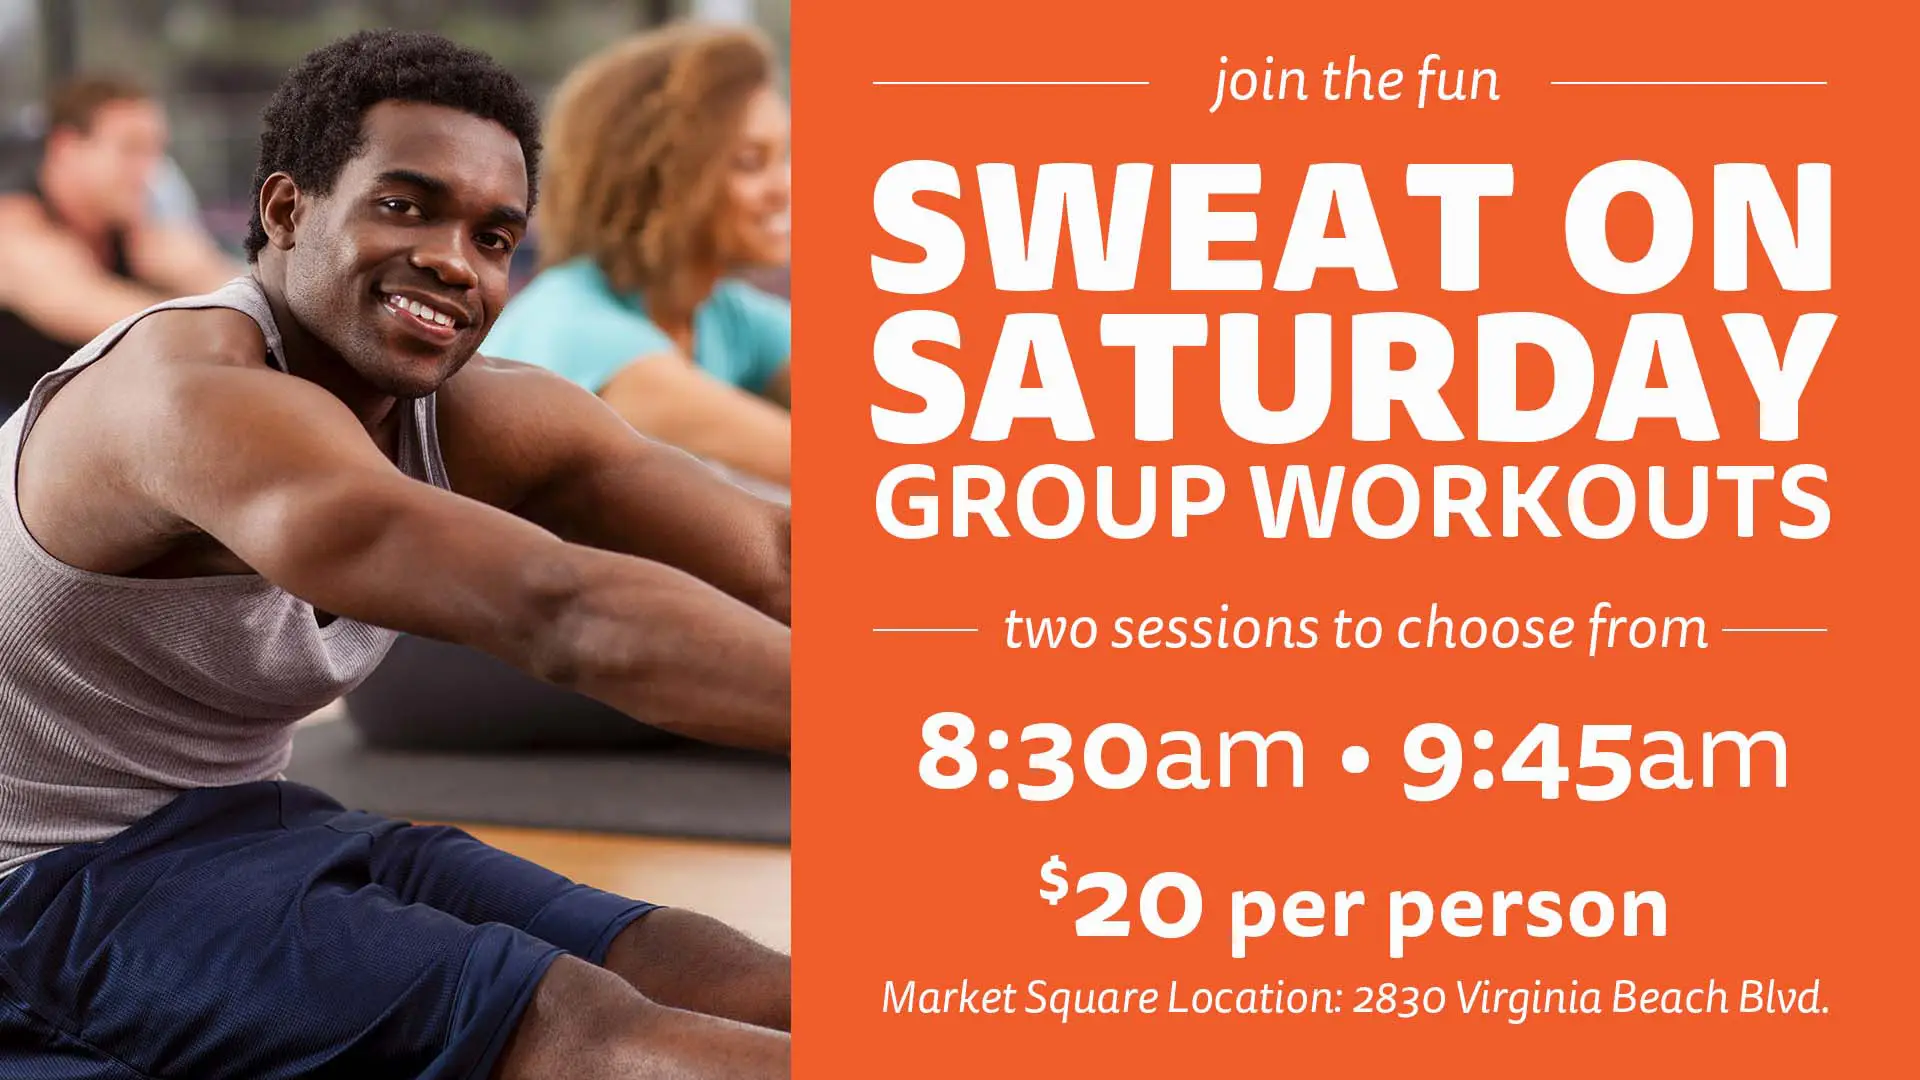 Sweat on Saturday Group Workout at Thrive Proactive Health